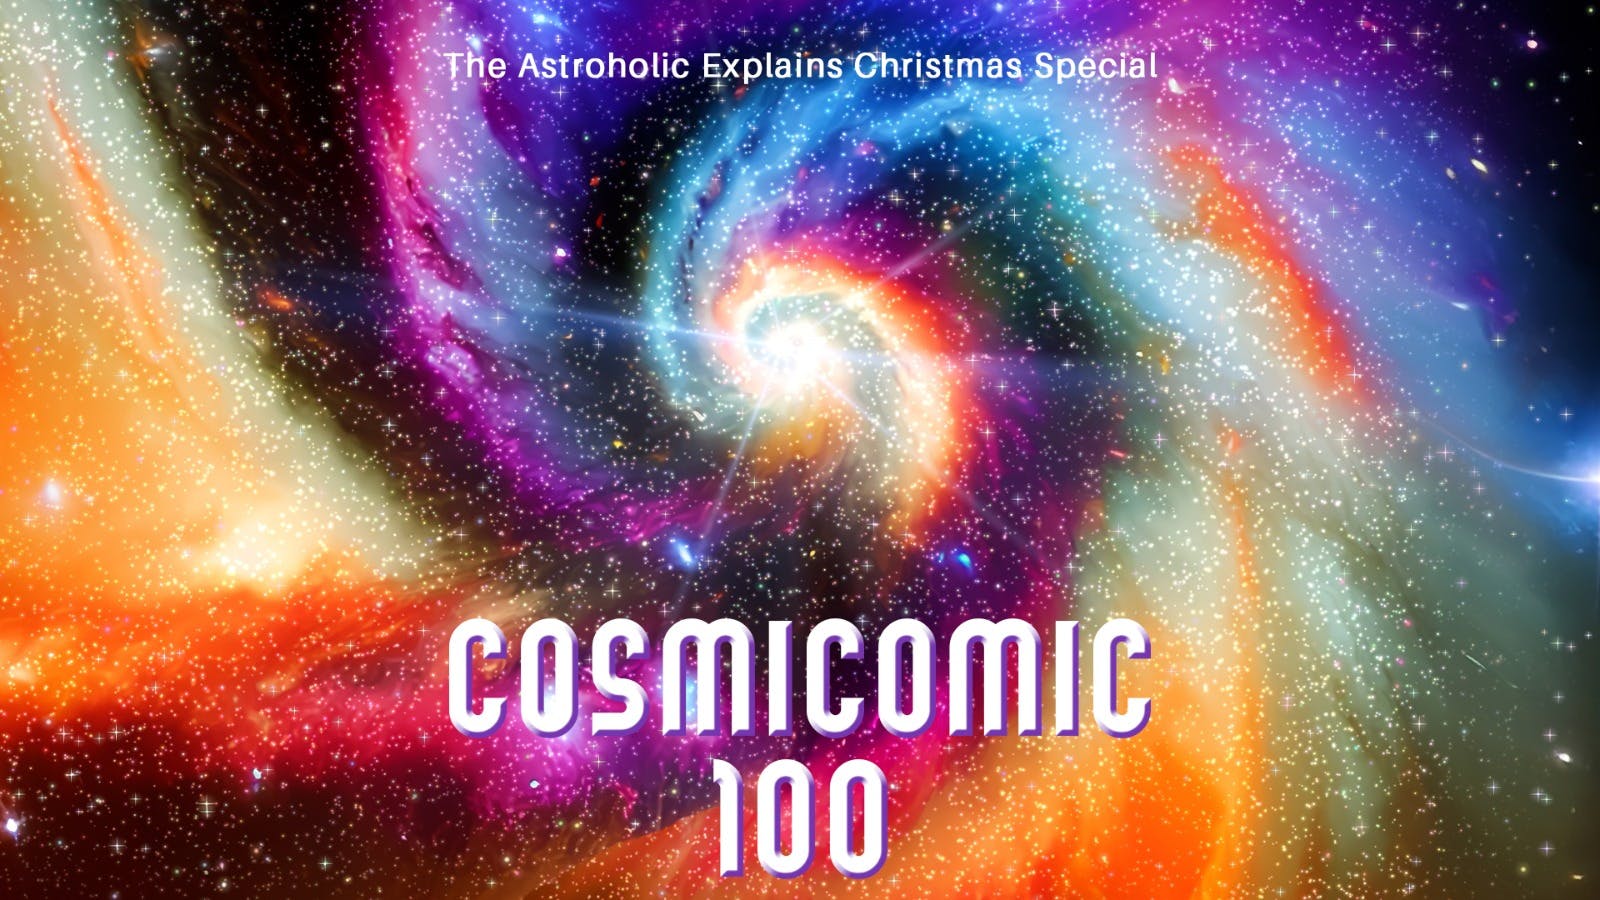 Title promo for the astroholic xmas special showing the title Cosmicomic 100 over a rainbow spiral nebula 